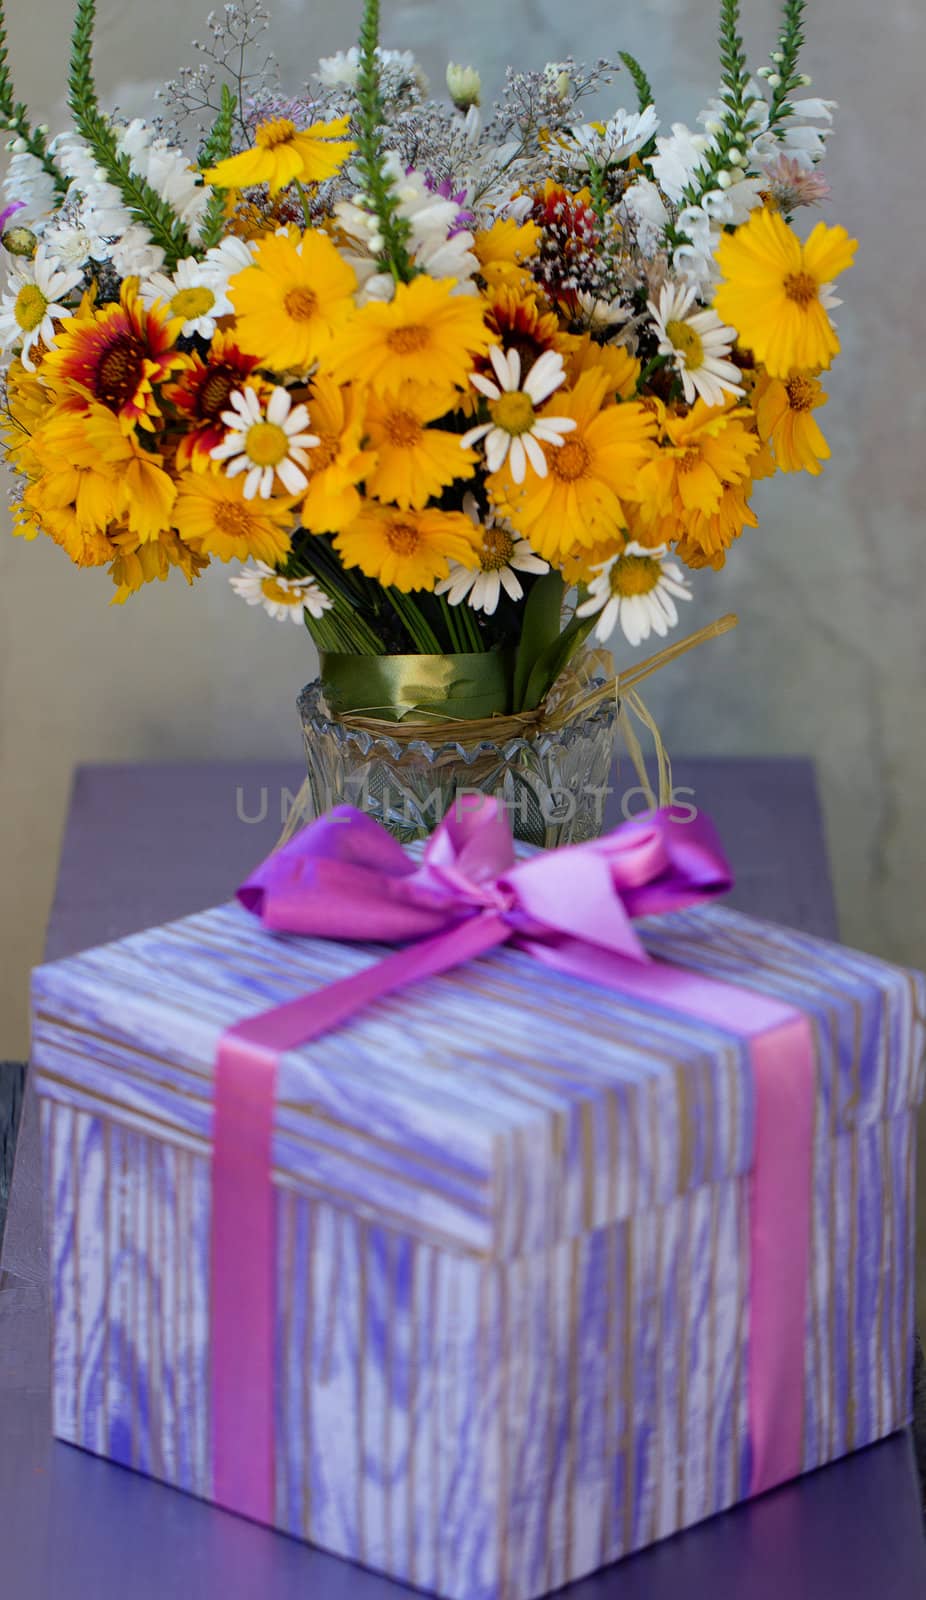 Bouquet of yellow wildflowers near the holiday gift